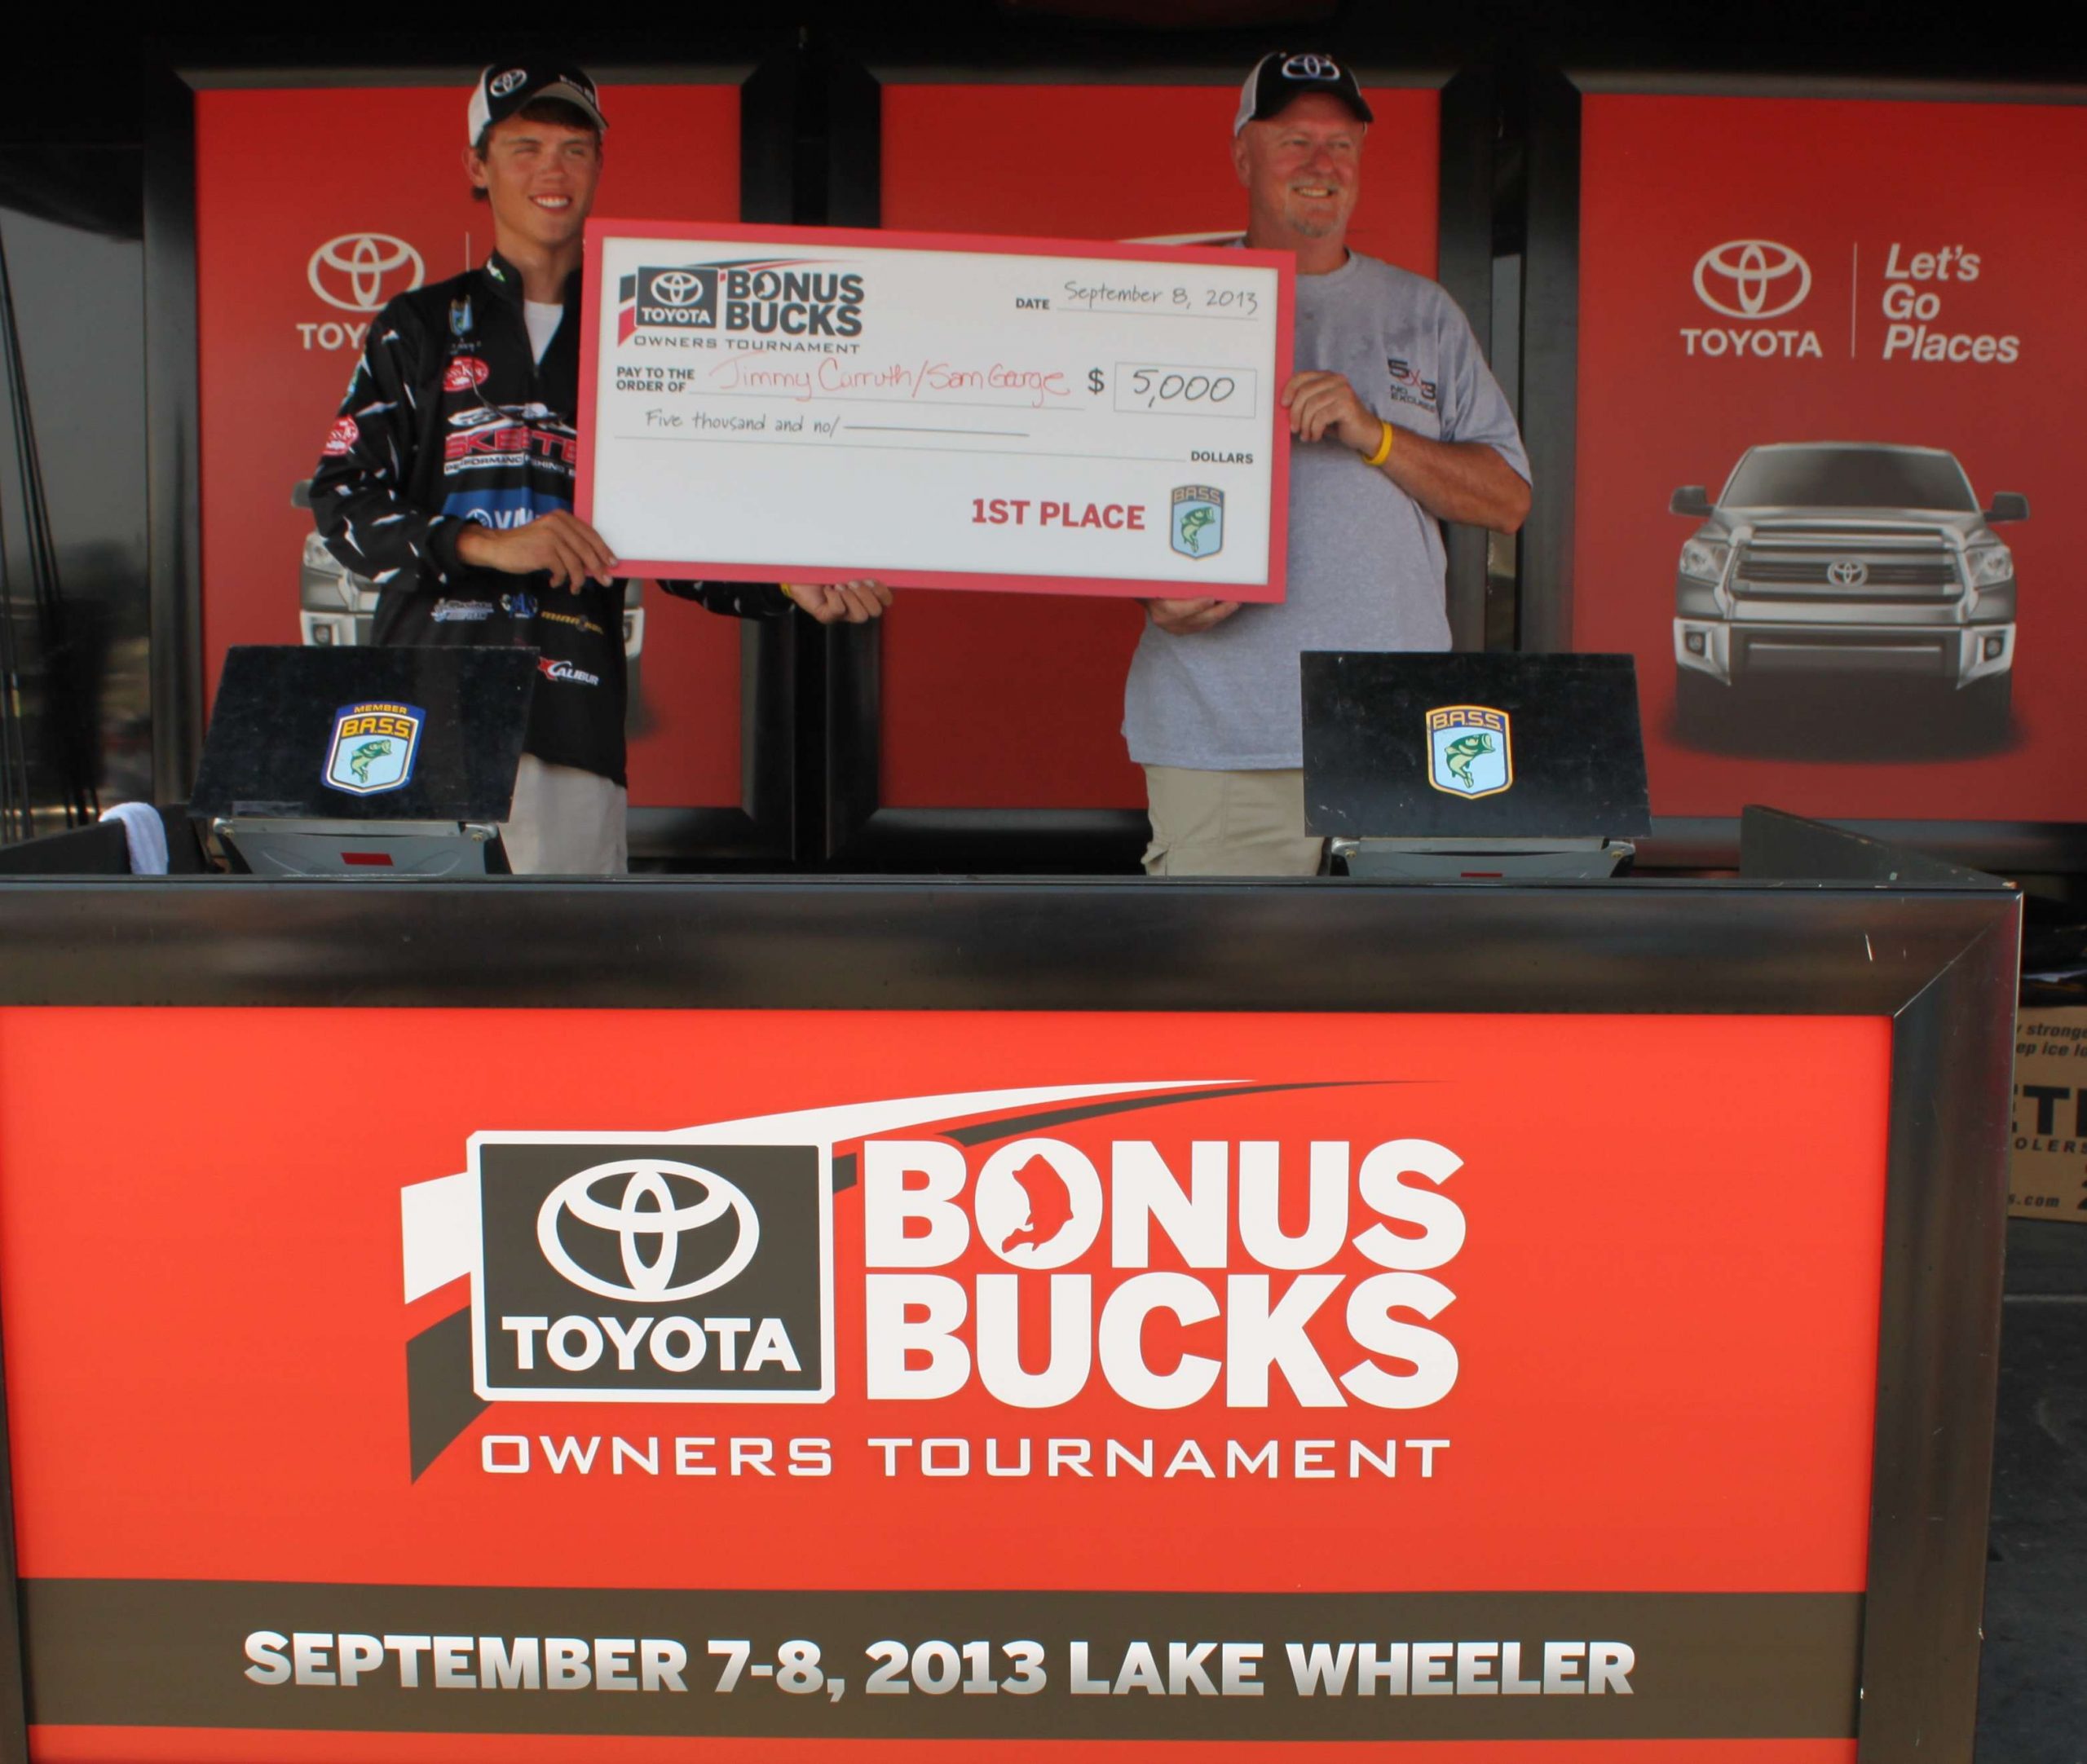 For owning a Toyota vehicle and winning the no-entry-fee 2013 Toyota Owners Tournament, Sam George and Jimmy Curruth were awarded $5,000.